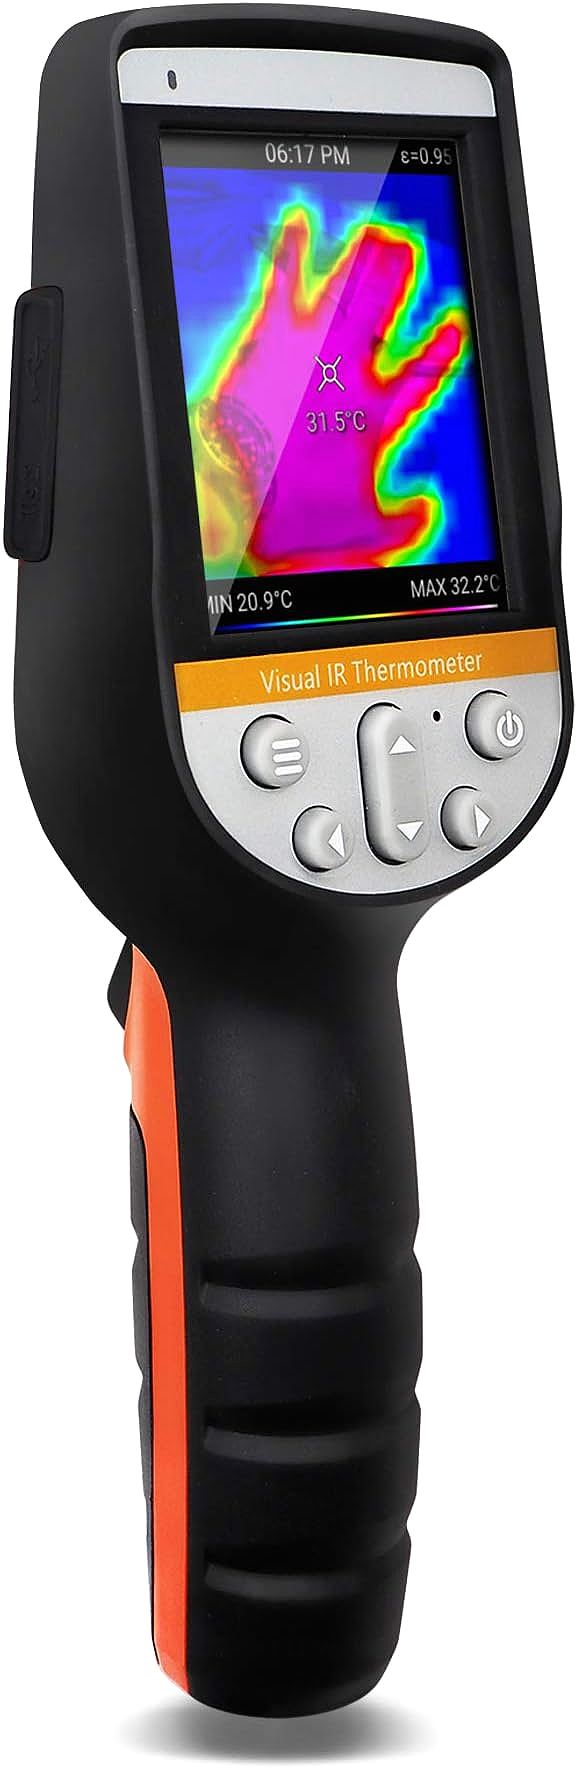 PerfectPrime IR0280 Infrared Thermal Imager - A Powerful and Versatile Tool for Inspection